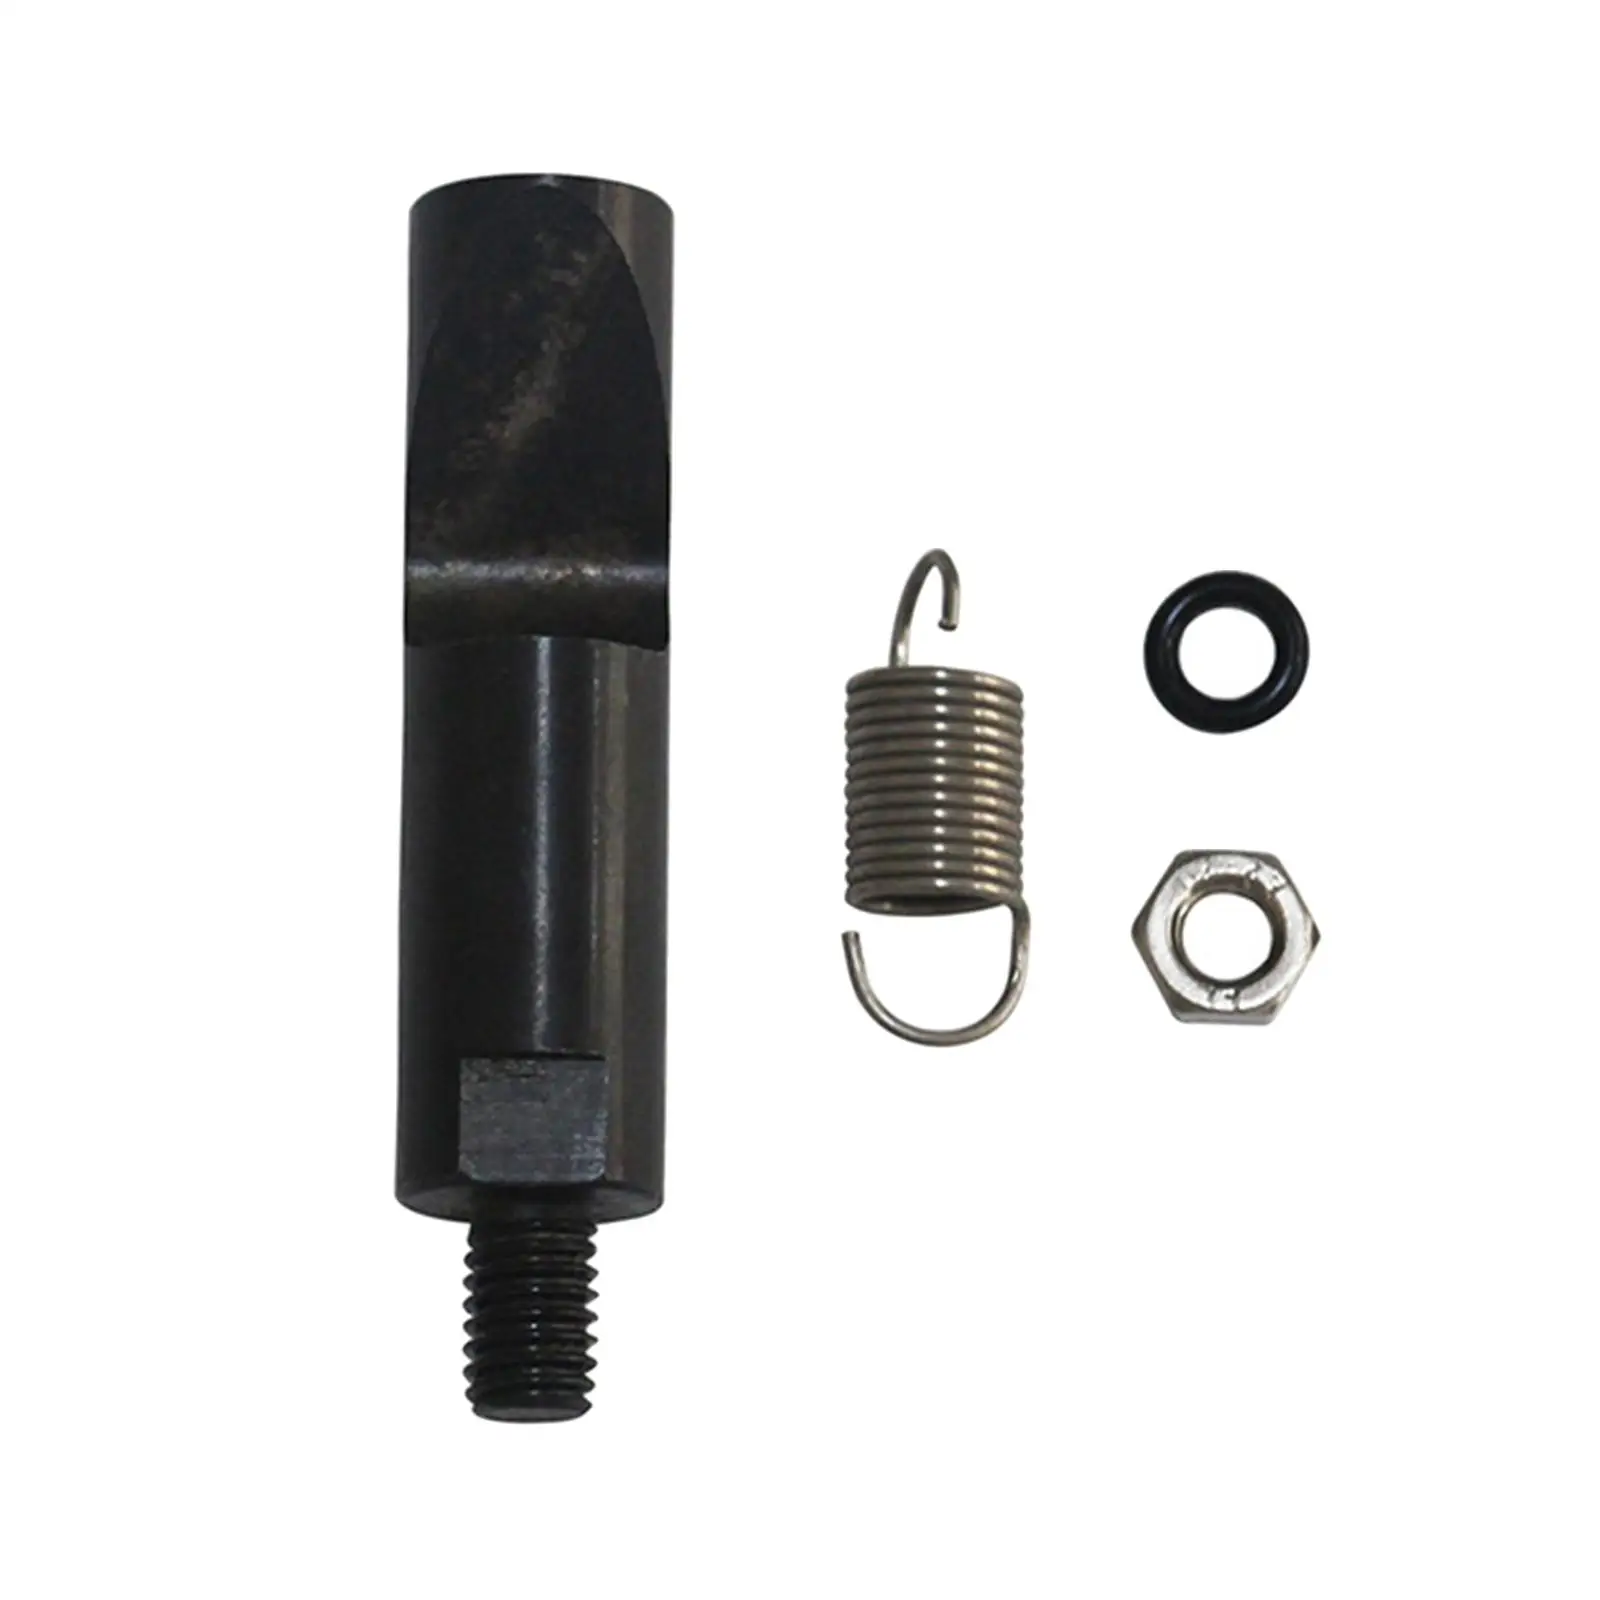 Ve Pump Fuel Pin and Governor Spring Kit Easily Install Car Accessories for Dodge 5.9L 1988 to 1993 Cummins Easy to Use Premium